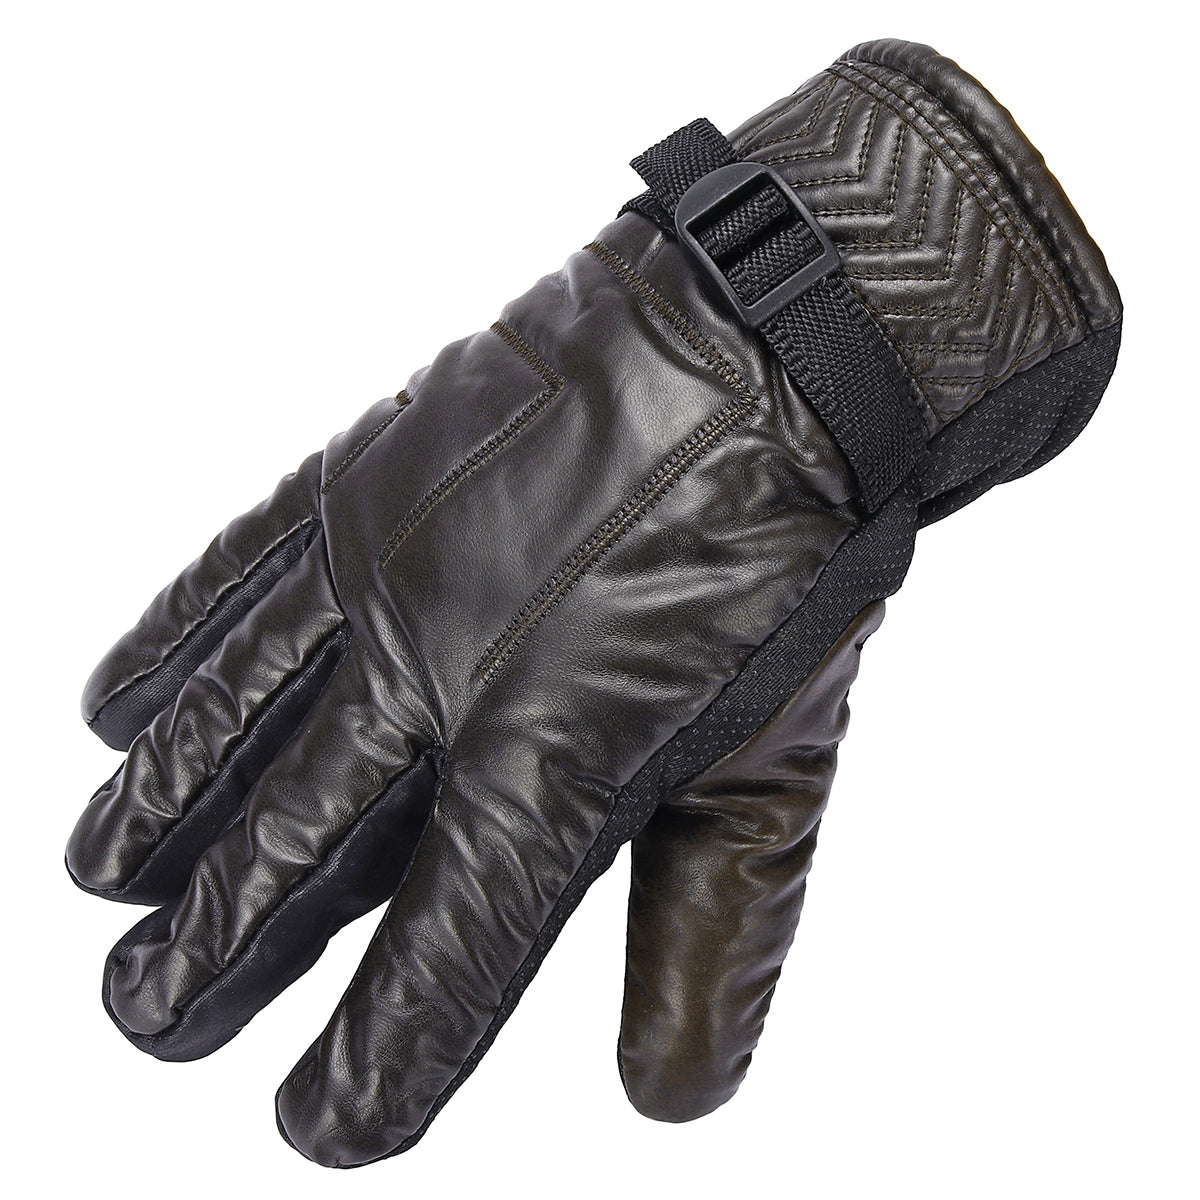 Dark Slate Gray Warm Gloves Mittens Simulation Leather Full Fluff Windproof Motorcycle Cold Protection